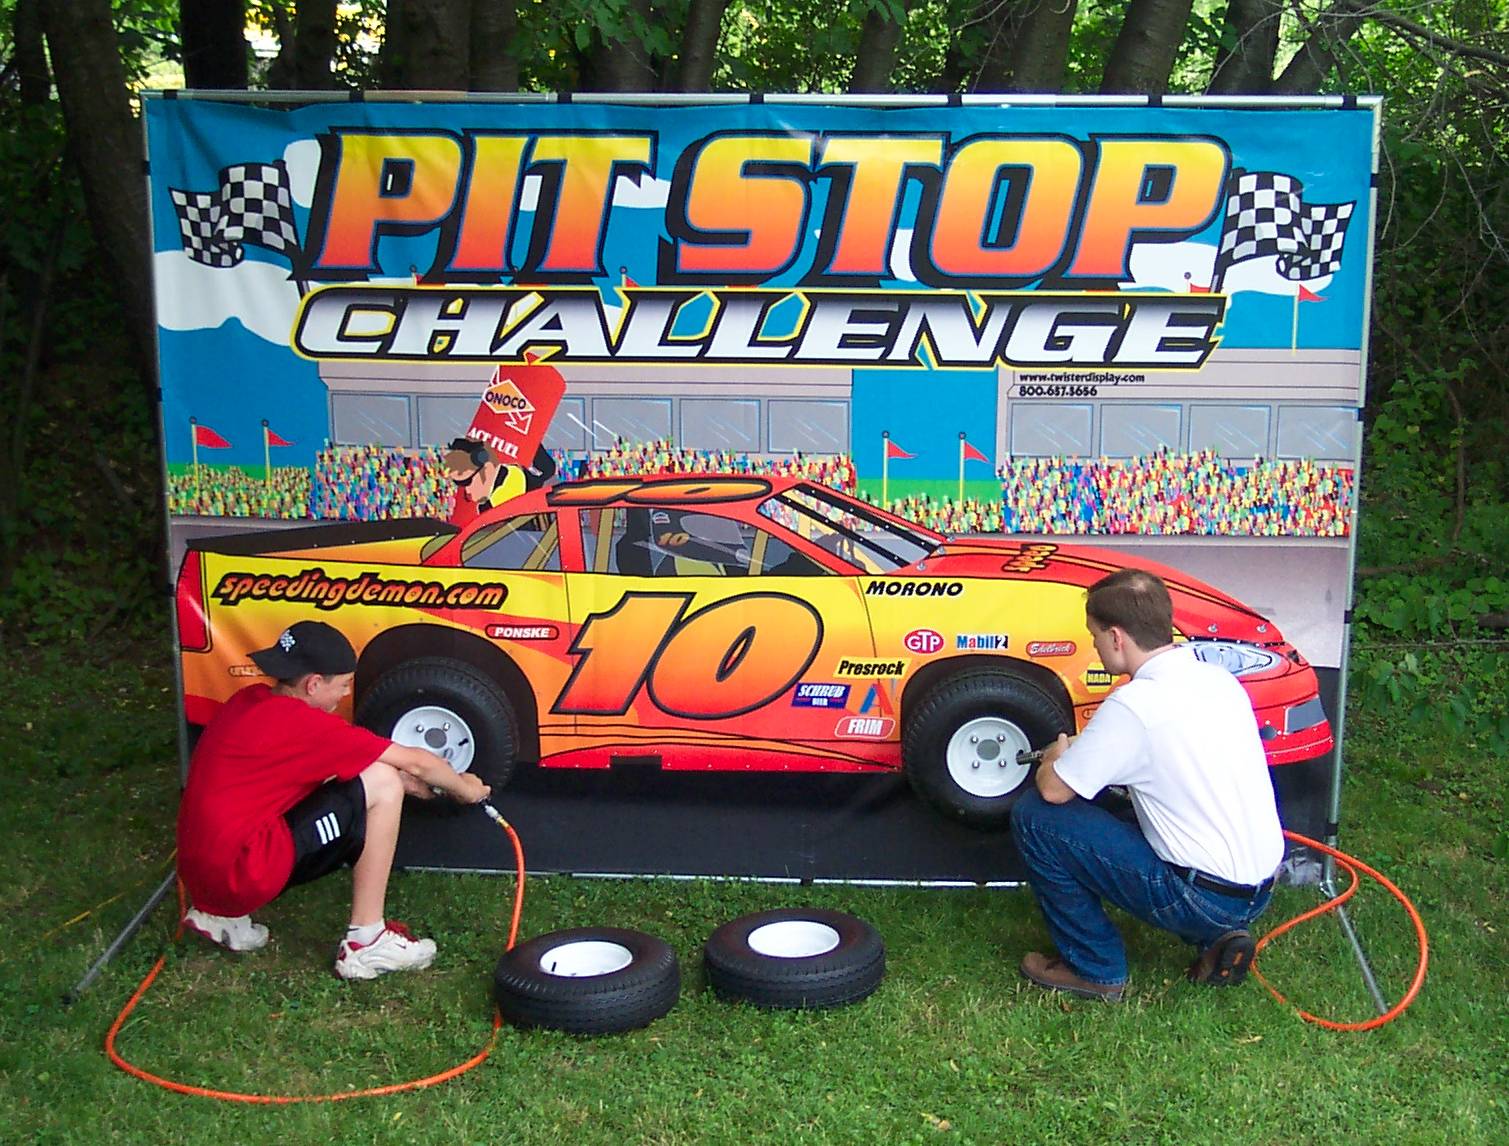 Pit Stop Challenge Carnival Game